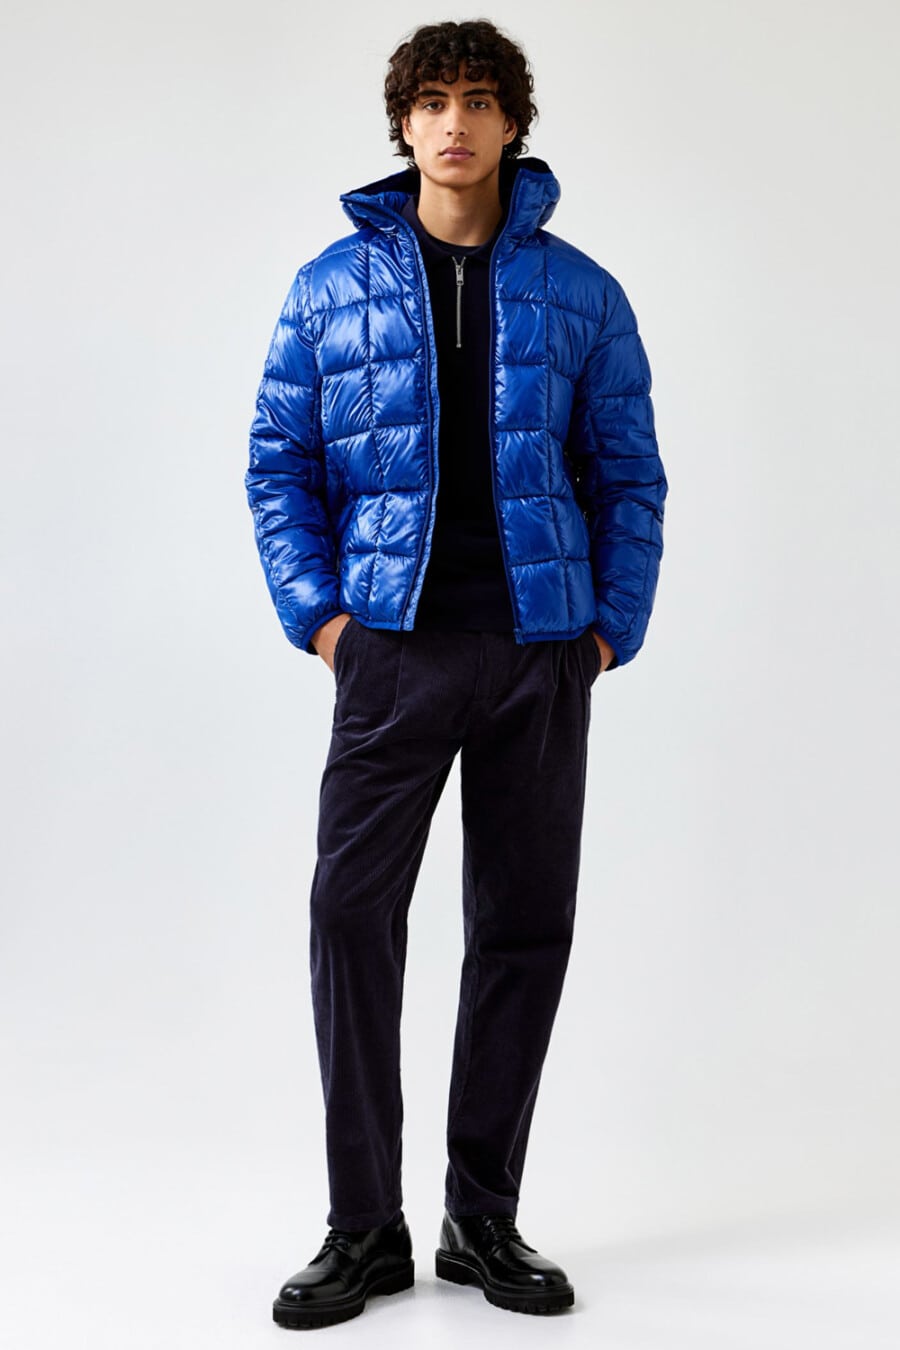 Men's navy corduroy trousers, navy zip-neck sweater, bright blue puffer jacket and black chunky shoes outfit